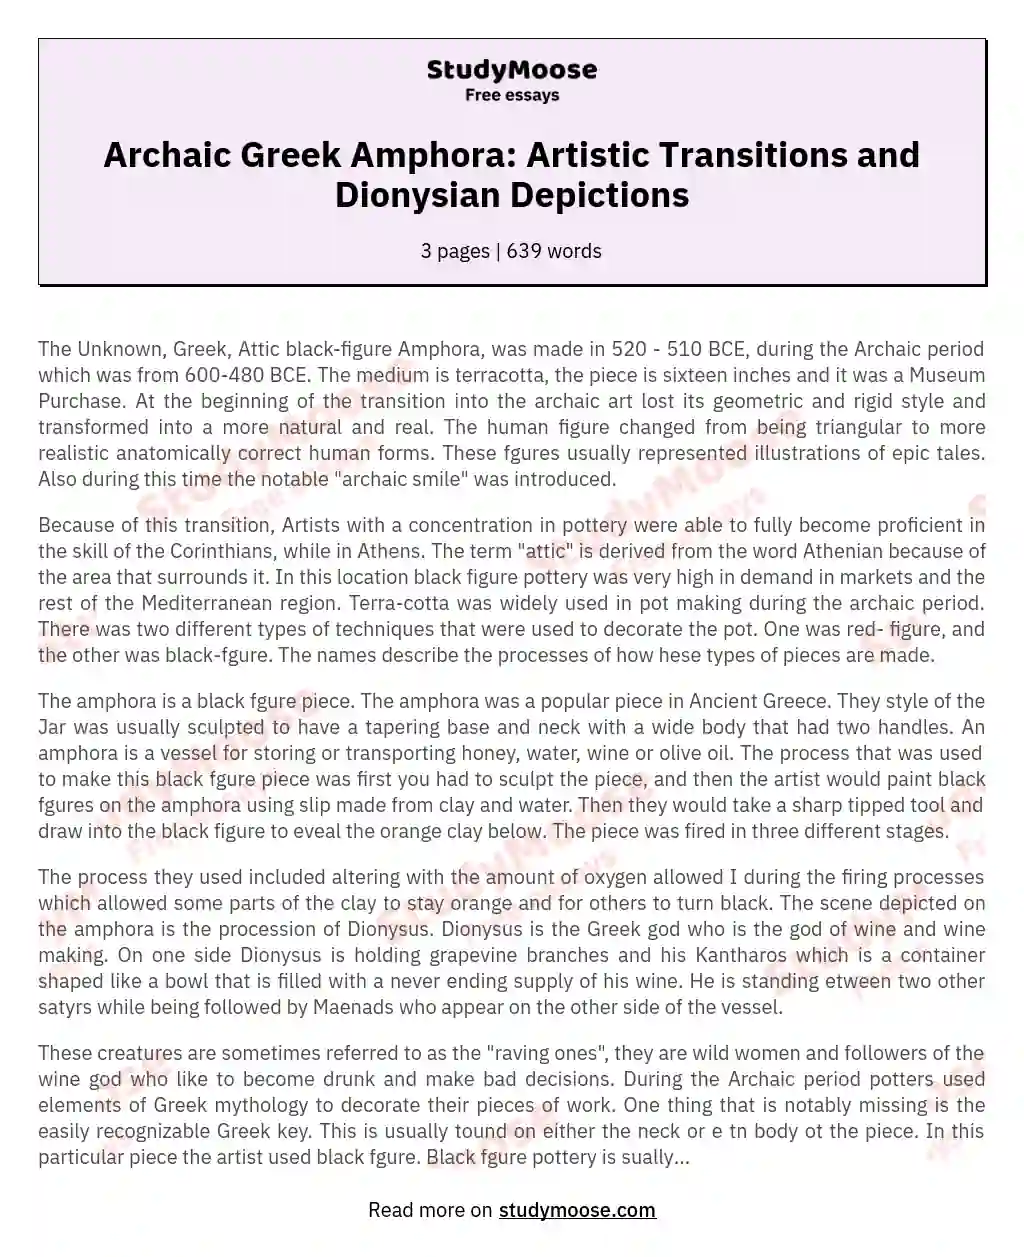 Archaic Greek Amphora: Artistic Transitions and Dionysian Depictions essay